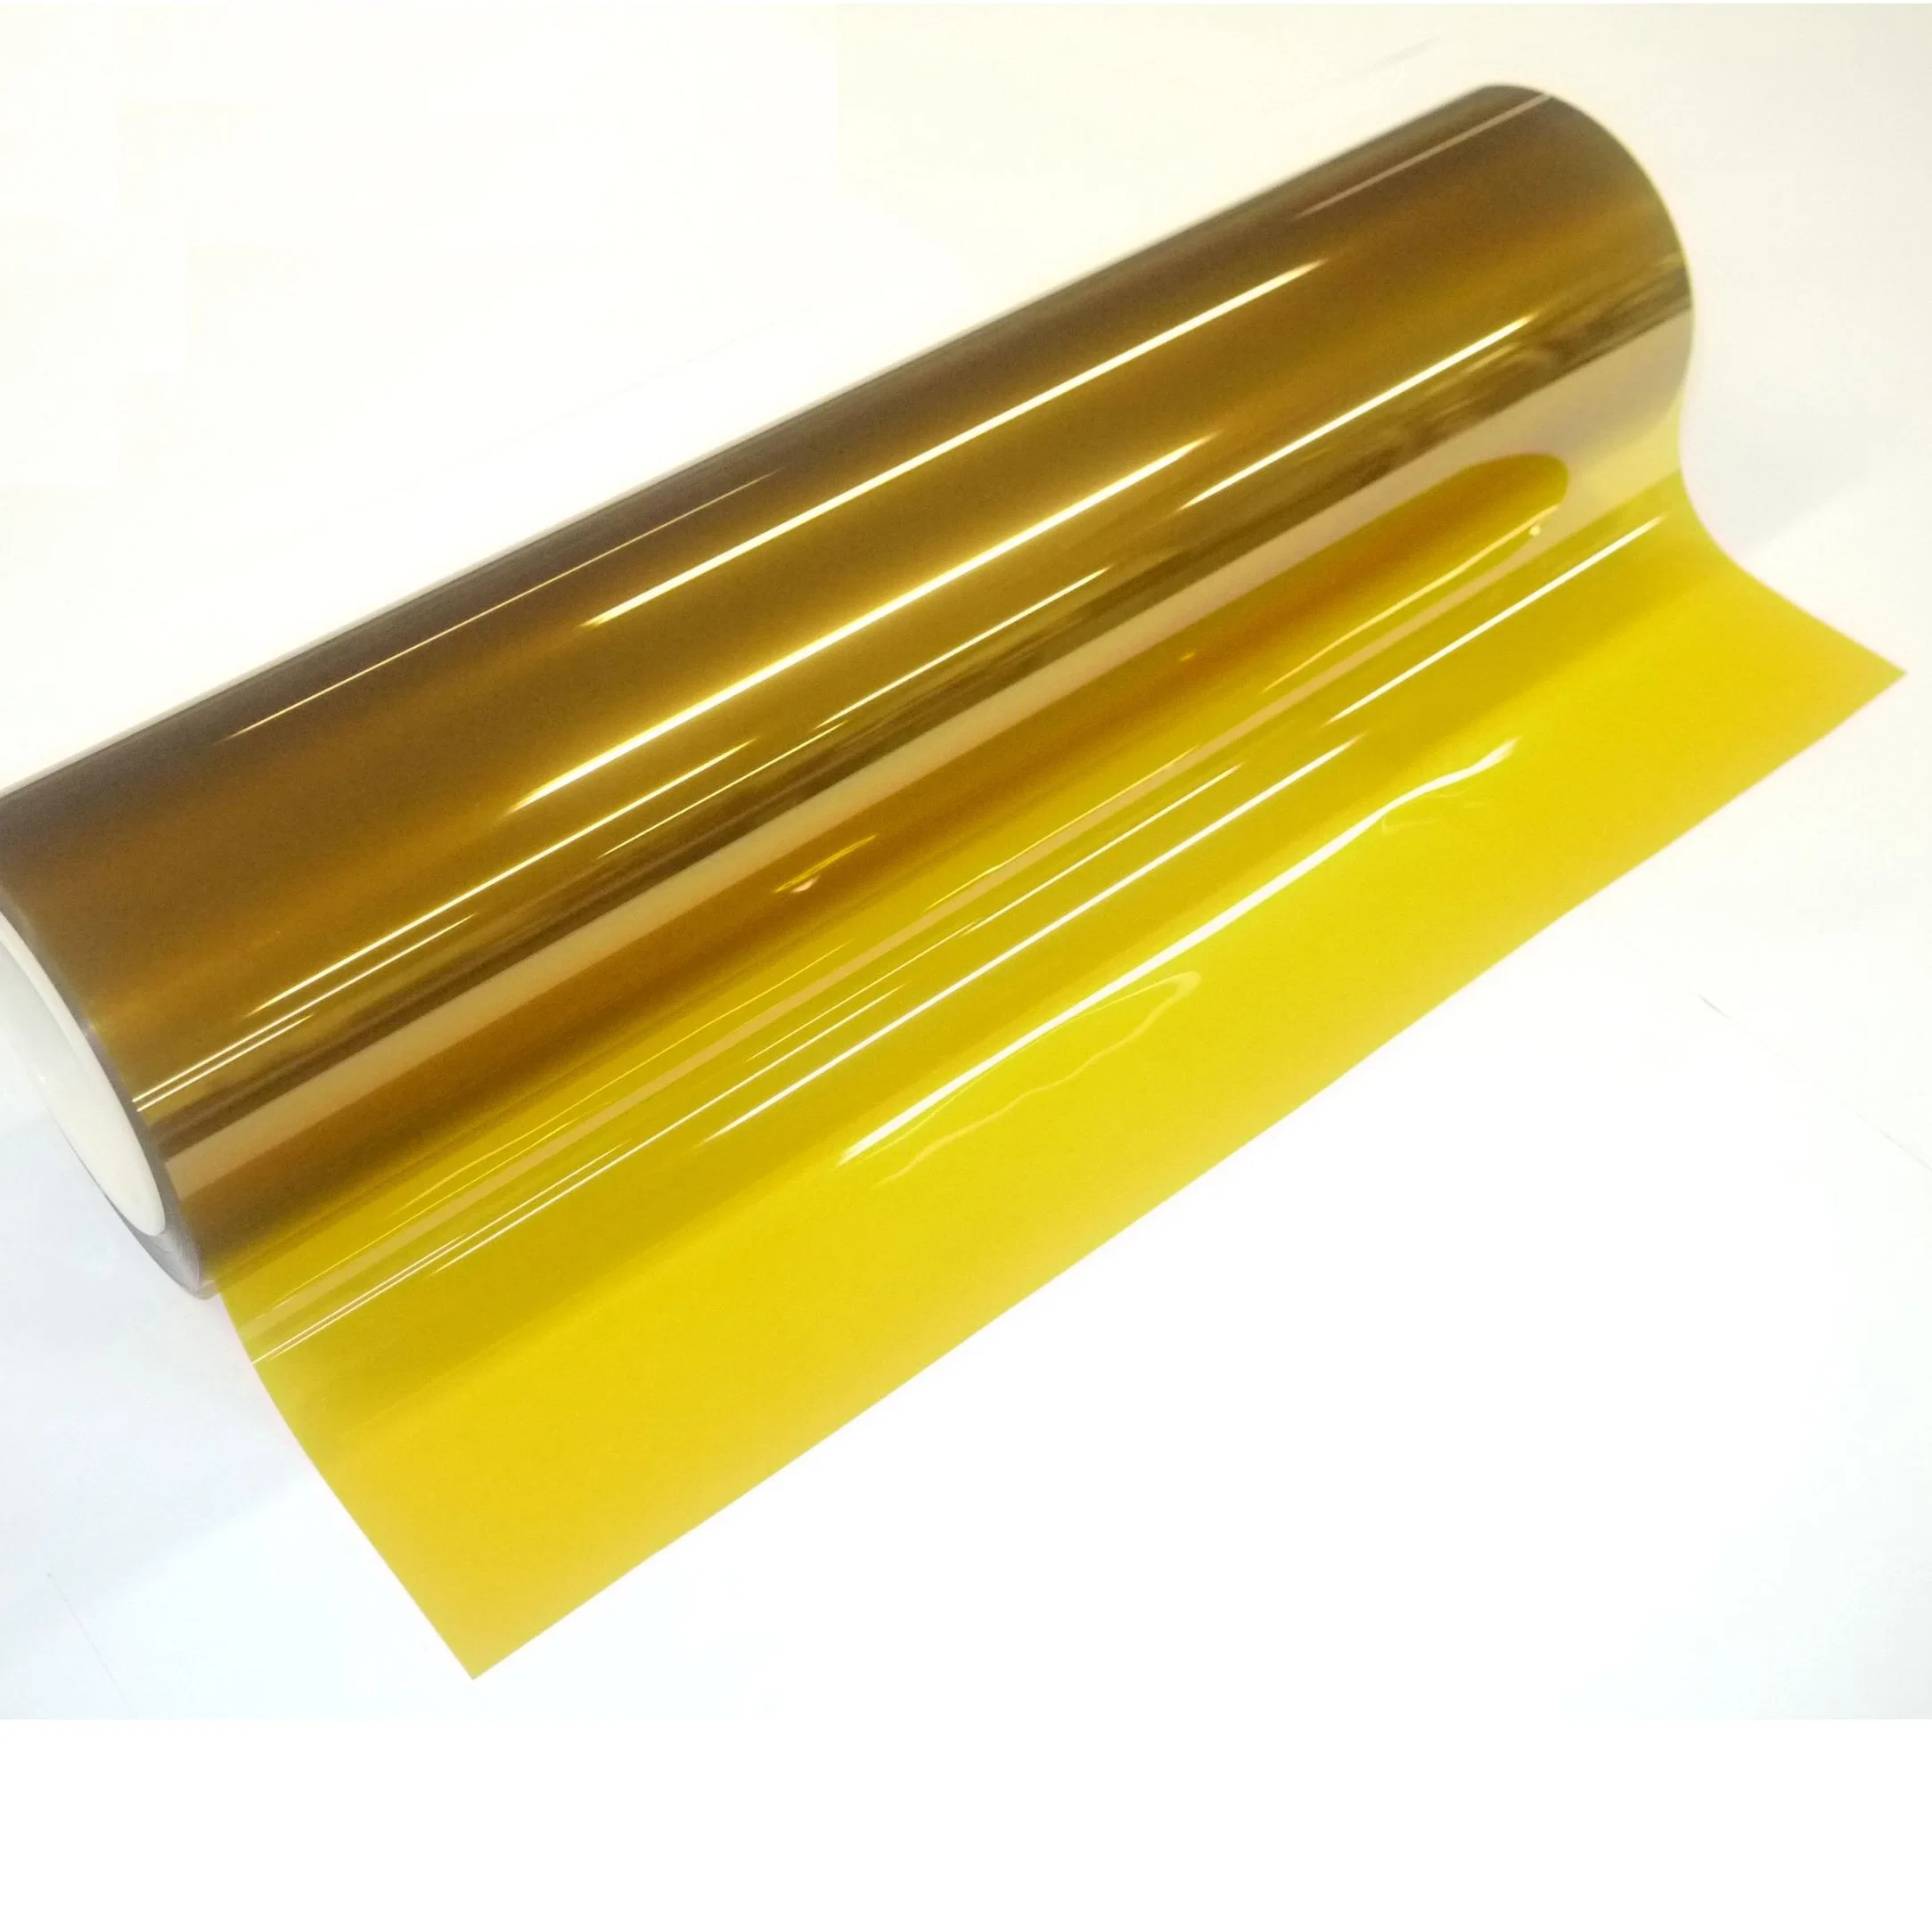 Ultra-High Heat-Resistant Performance F46 Polyimide Film